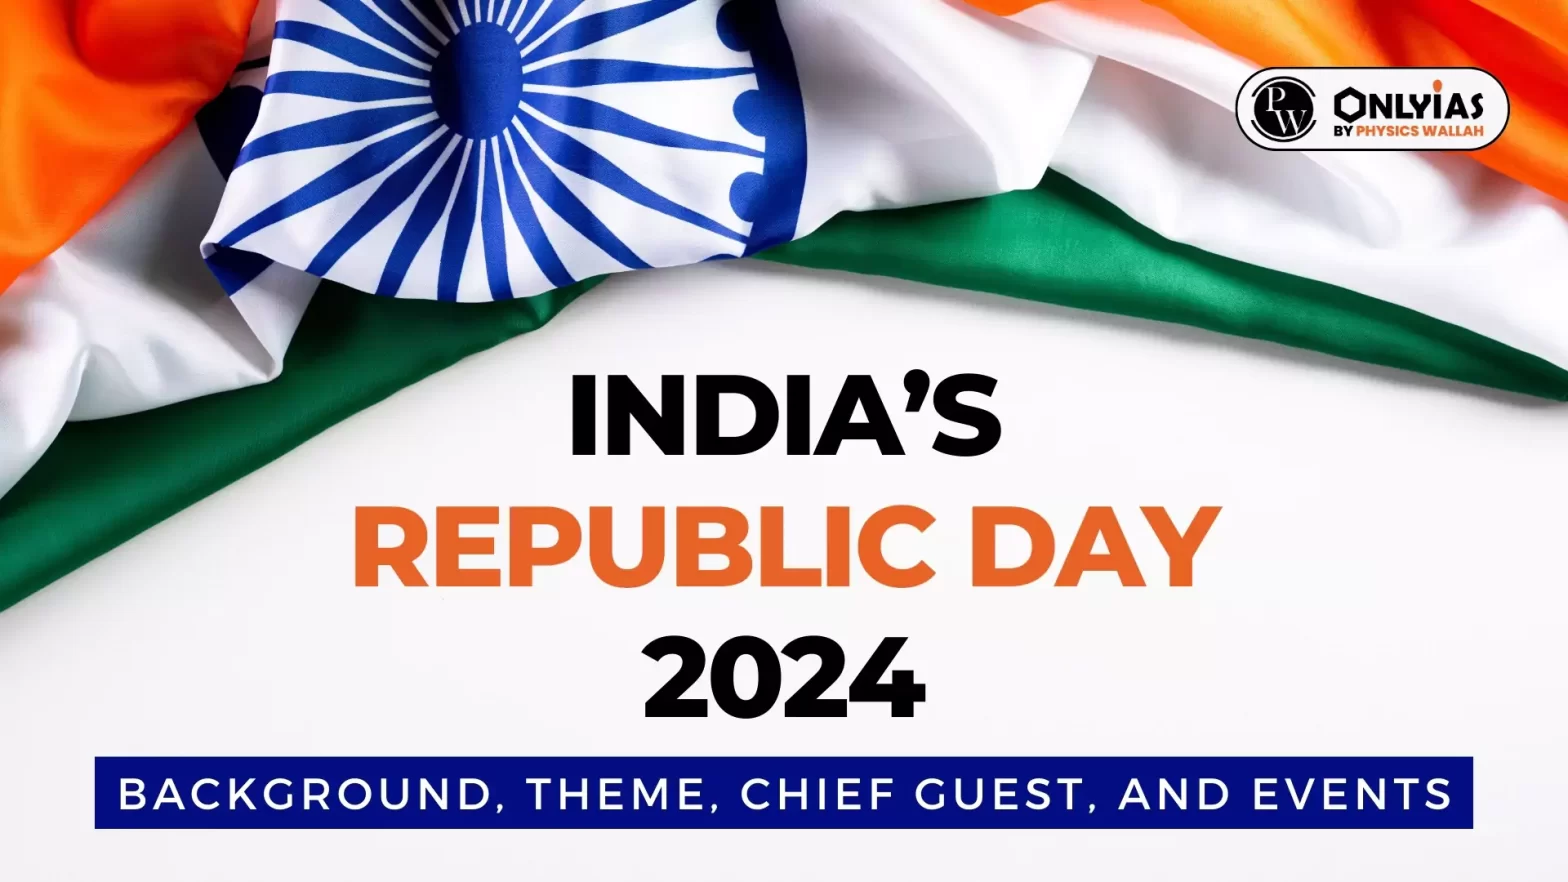 India’s Republic Day 2024: Background, Theme, Chief Guest, and Events